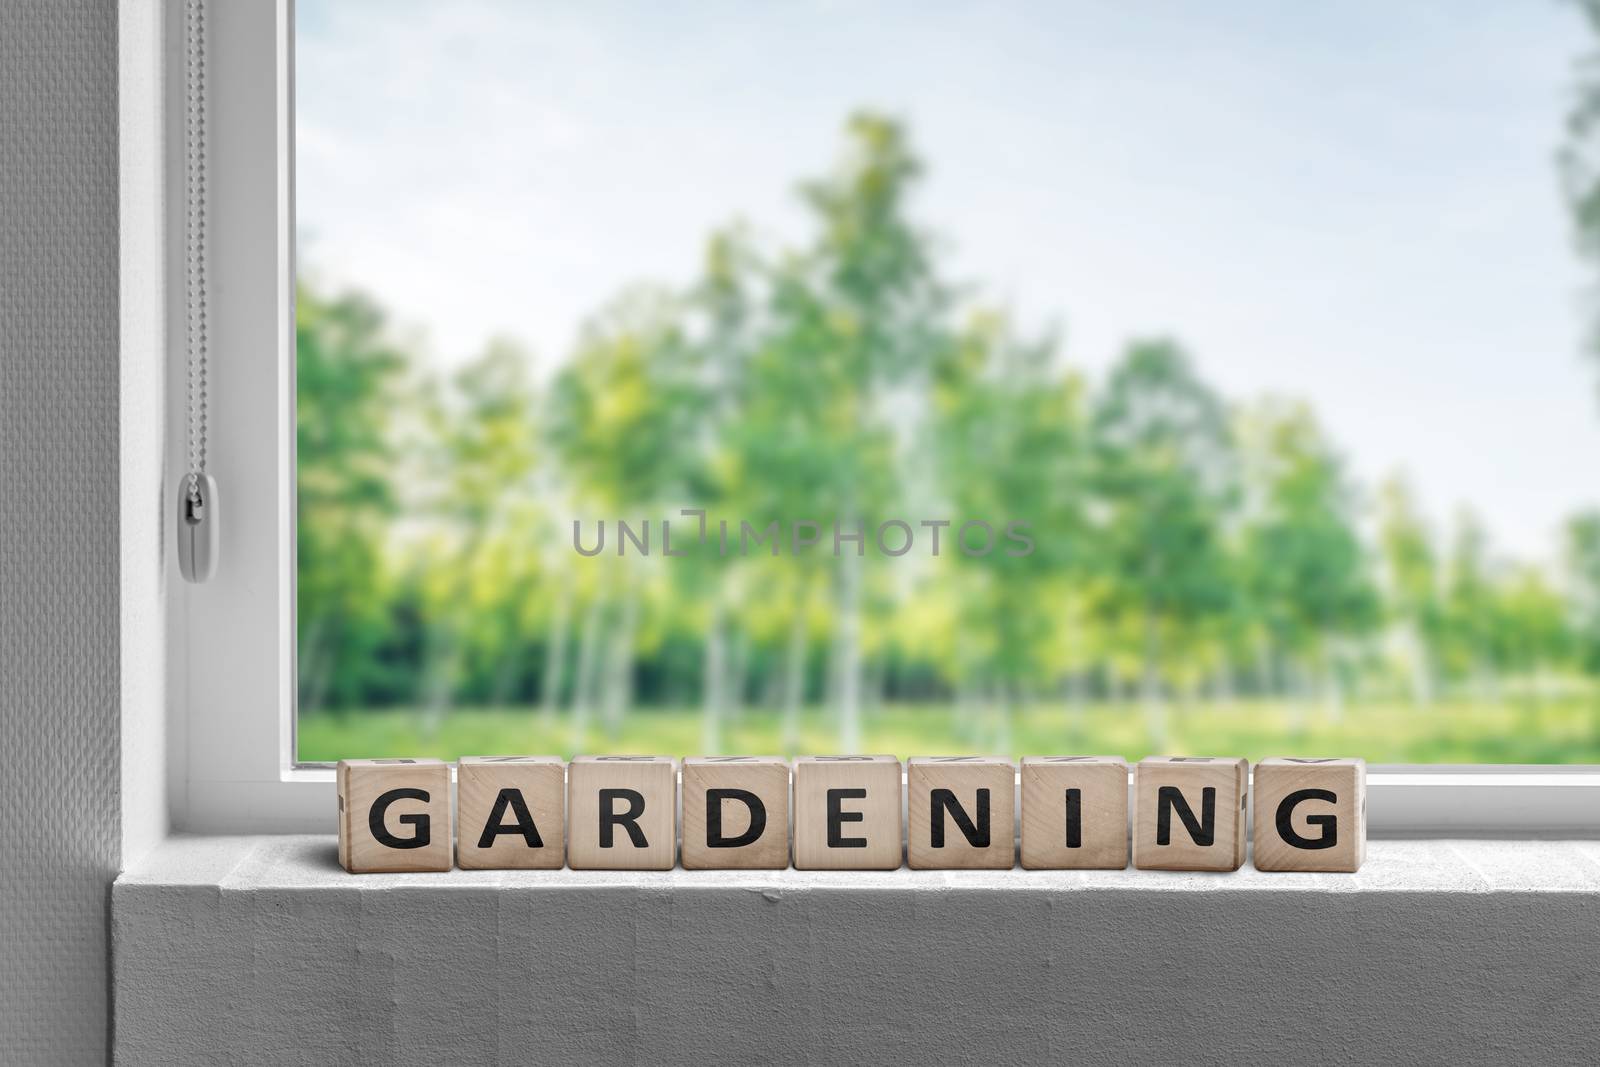 View to a garden in the spring with a gardening sign in a window sill